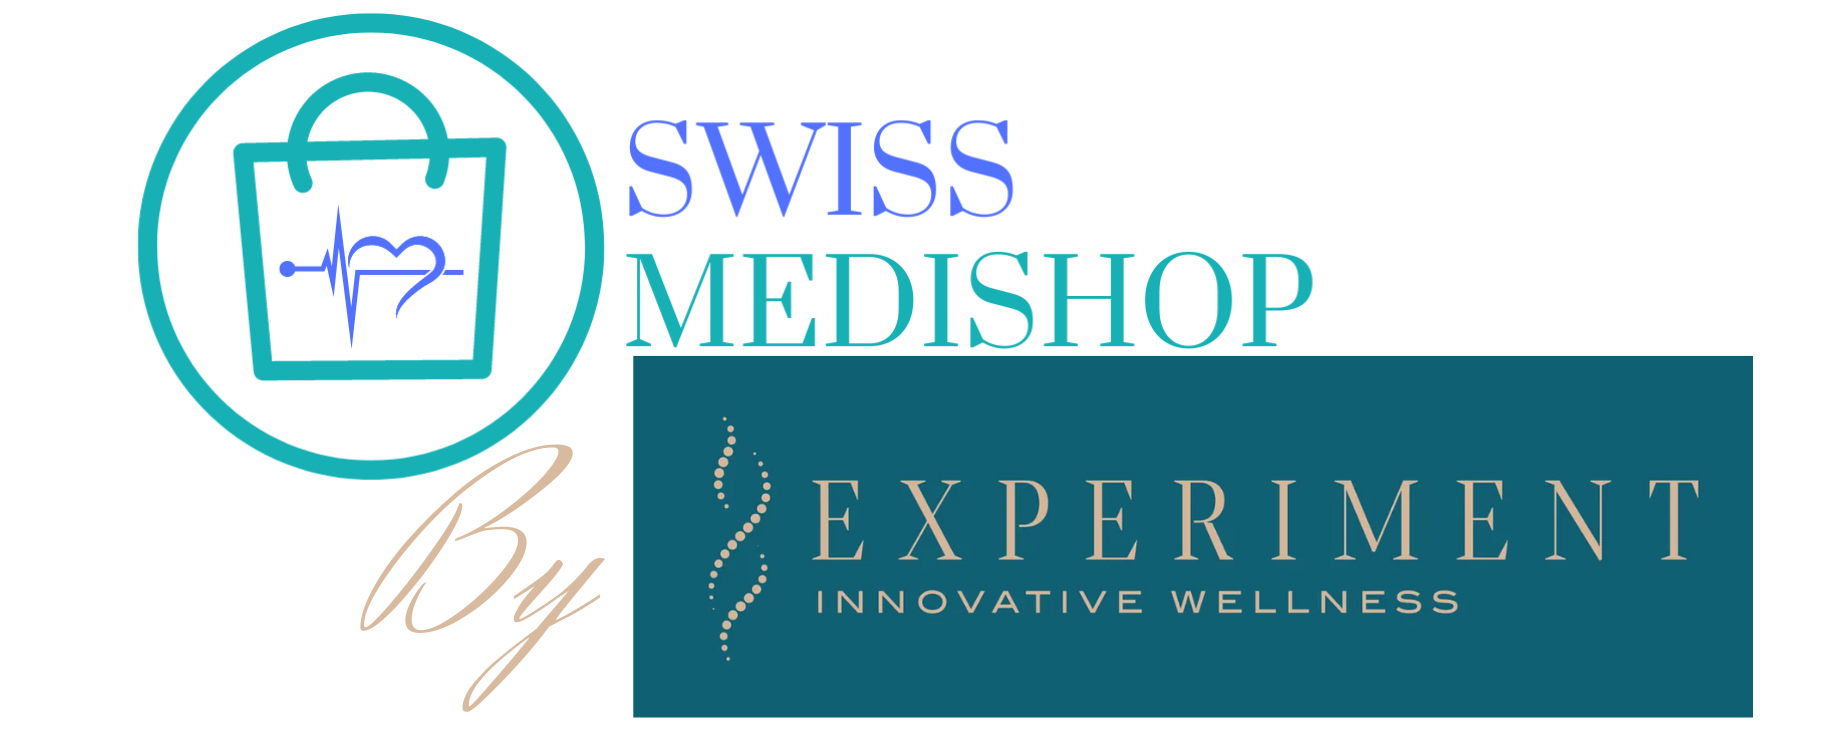 SWISS MEDI SHOP By EXPERIMENT